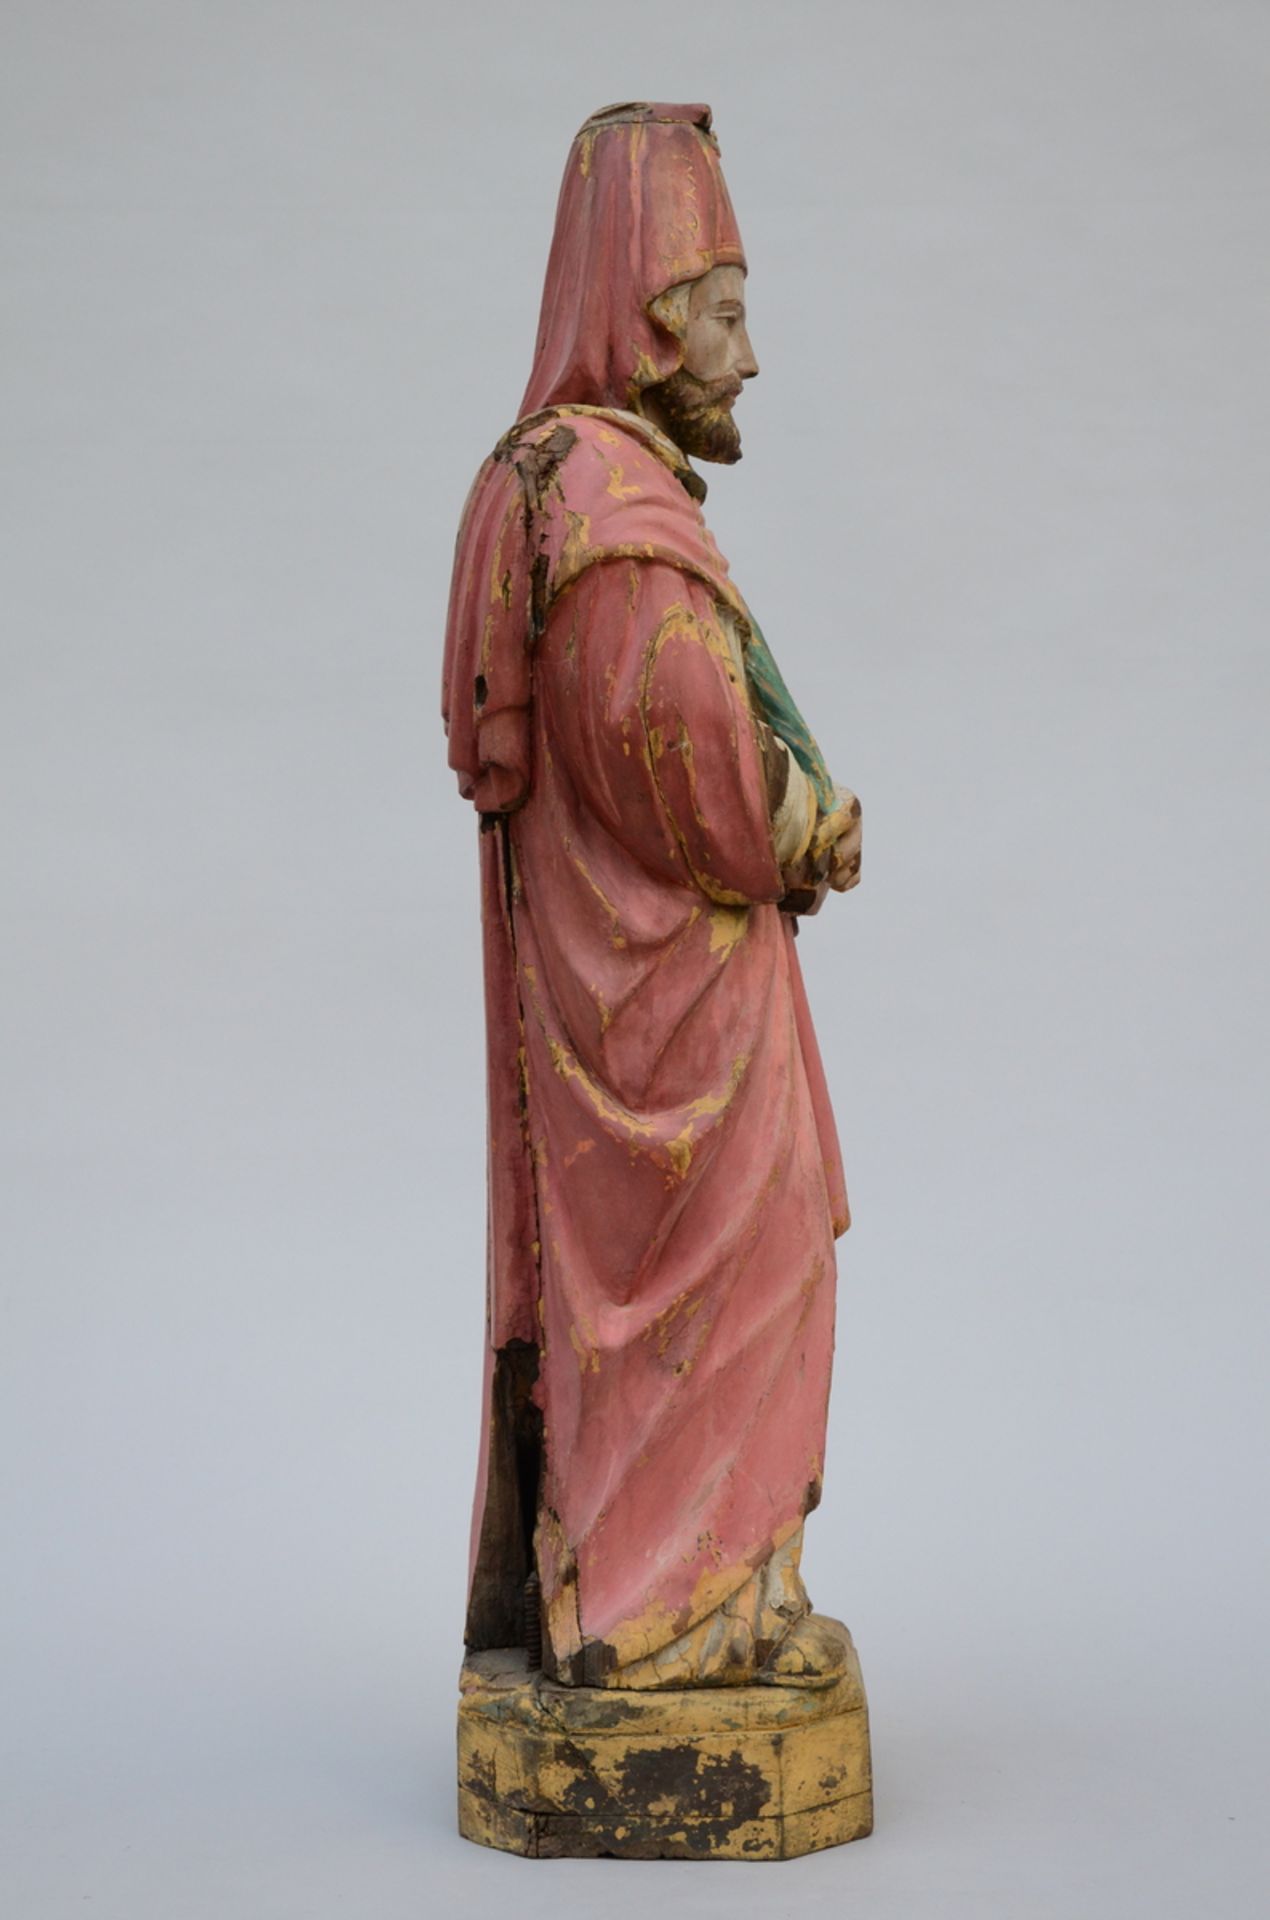 Polychrome statue in wood 'St. John from Britto', Goa (h87cm) (*) - Image 2 of 4